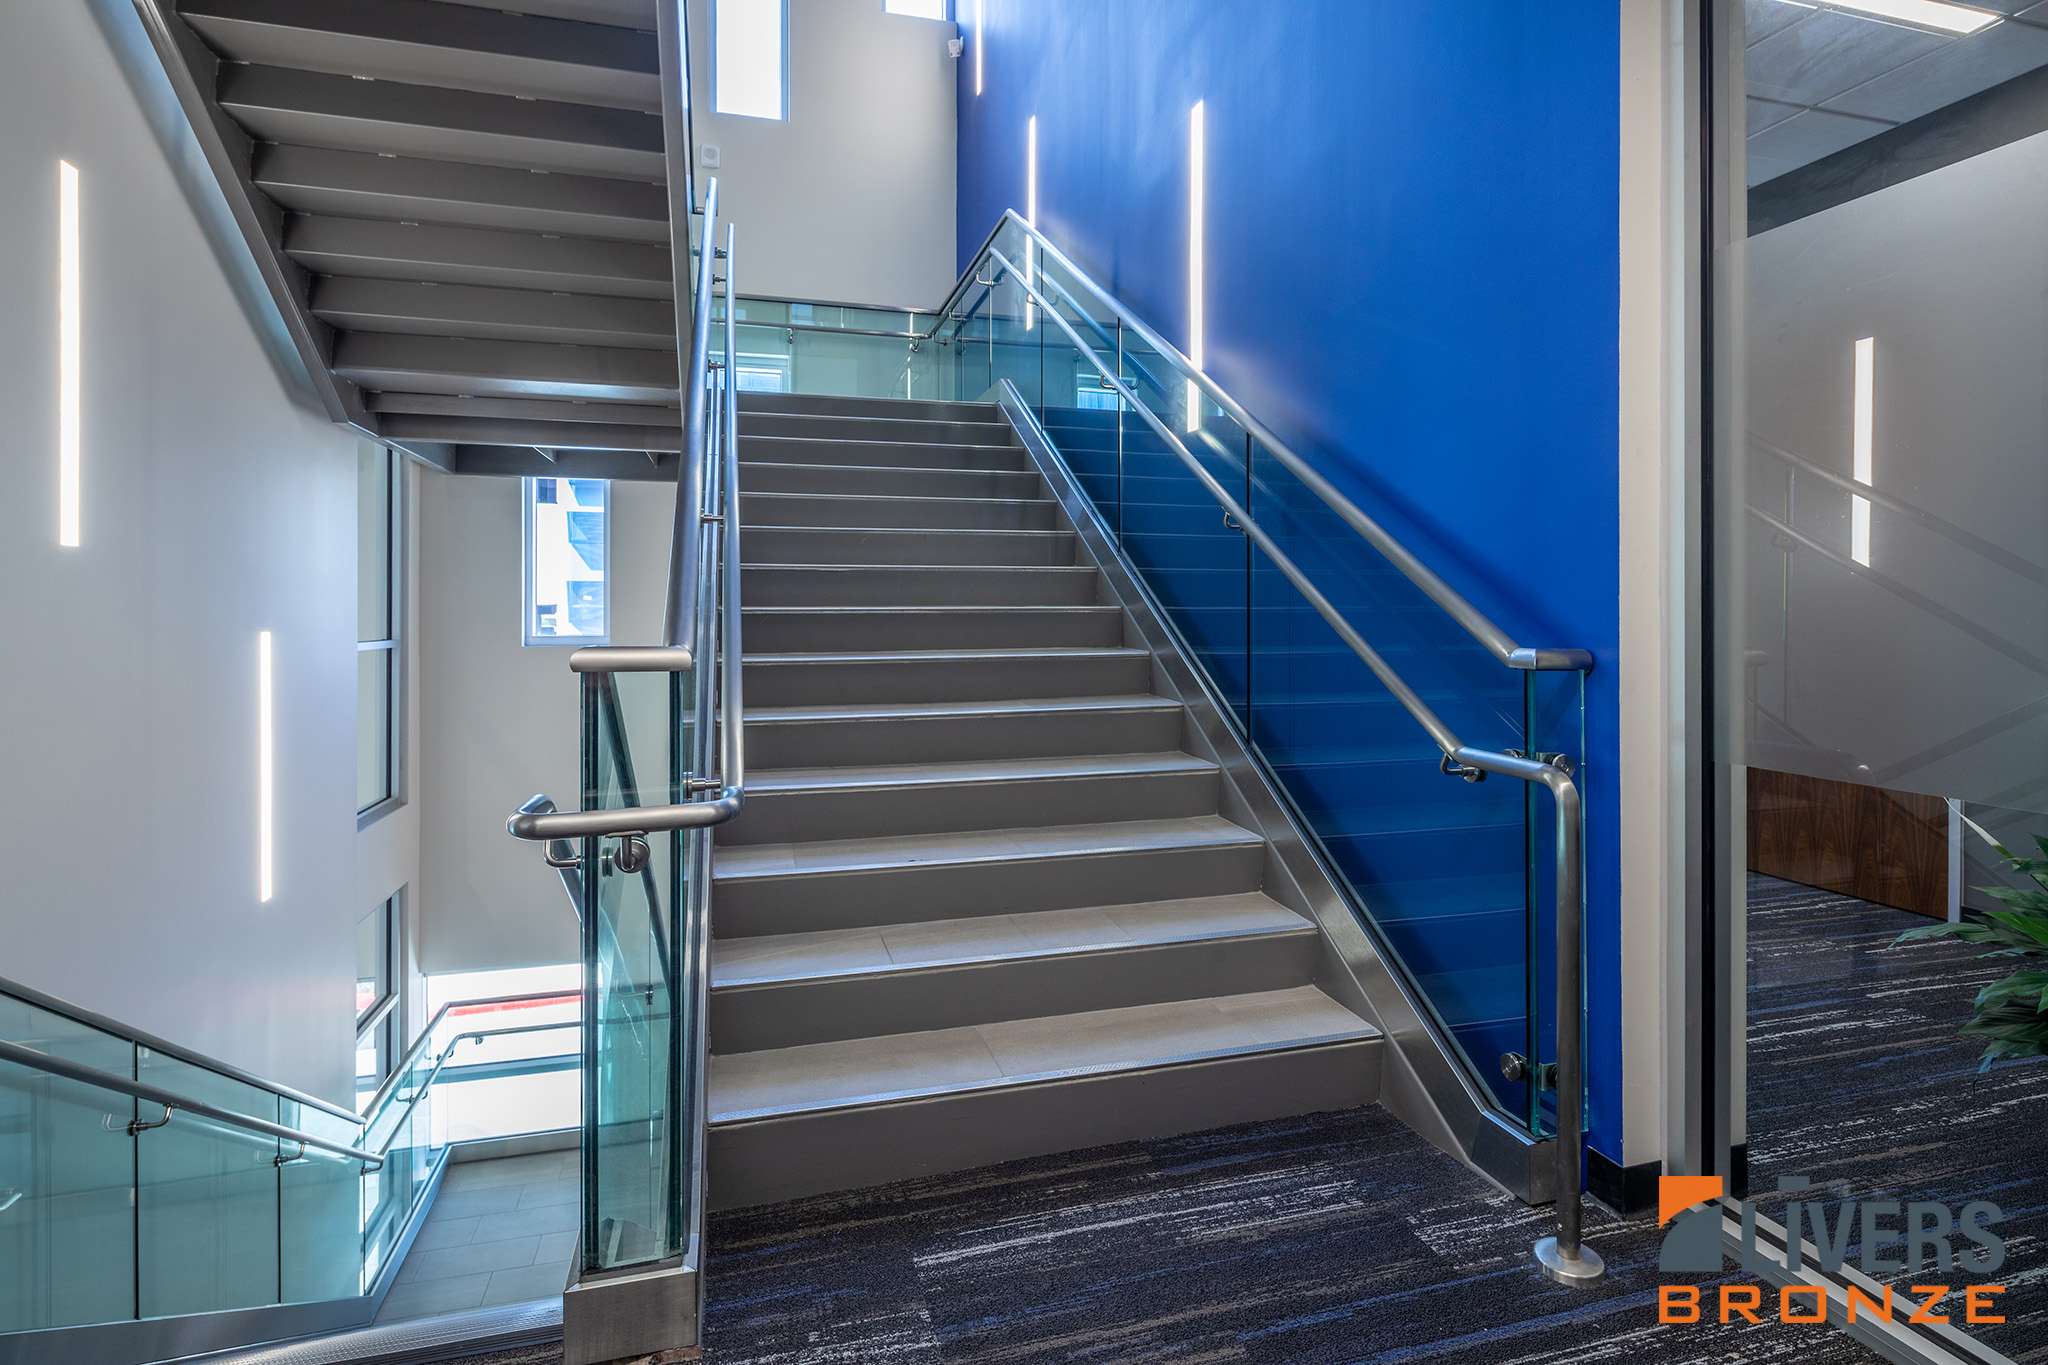 Livers Bronze Struct-U-Rail Commercial Glass Railing with laminated glass installed in San Antonio Independent School District Central Office Building is Made in the USA